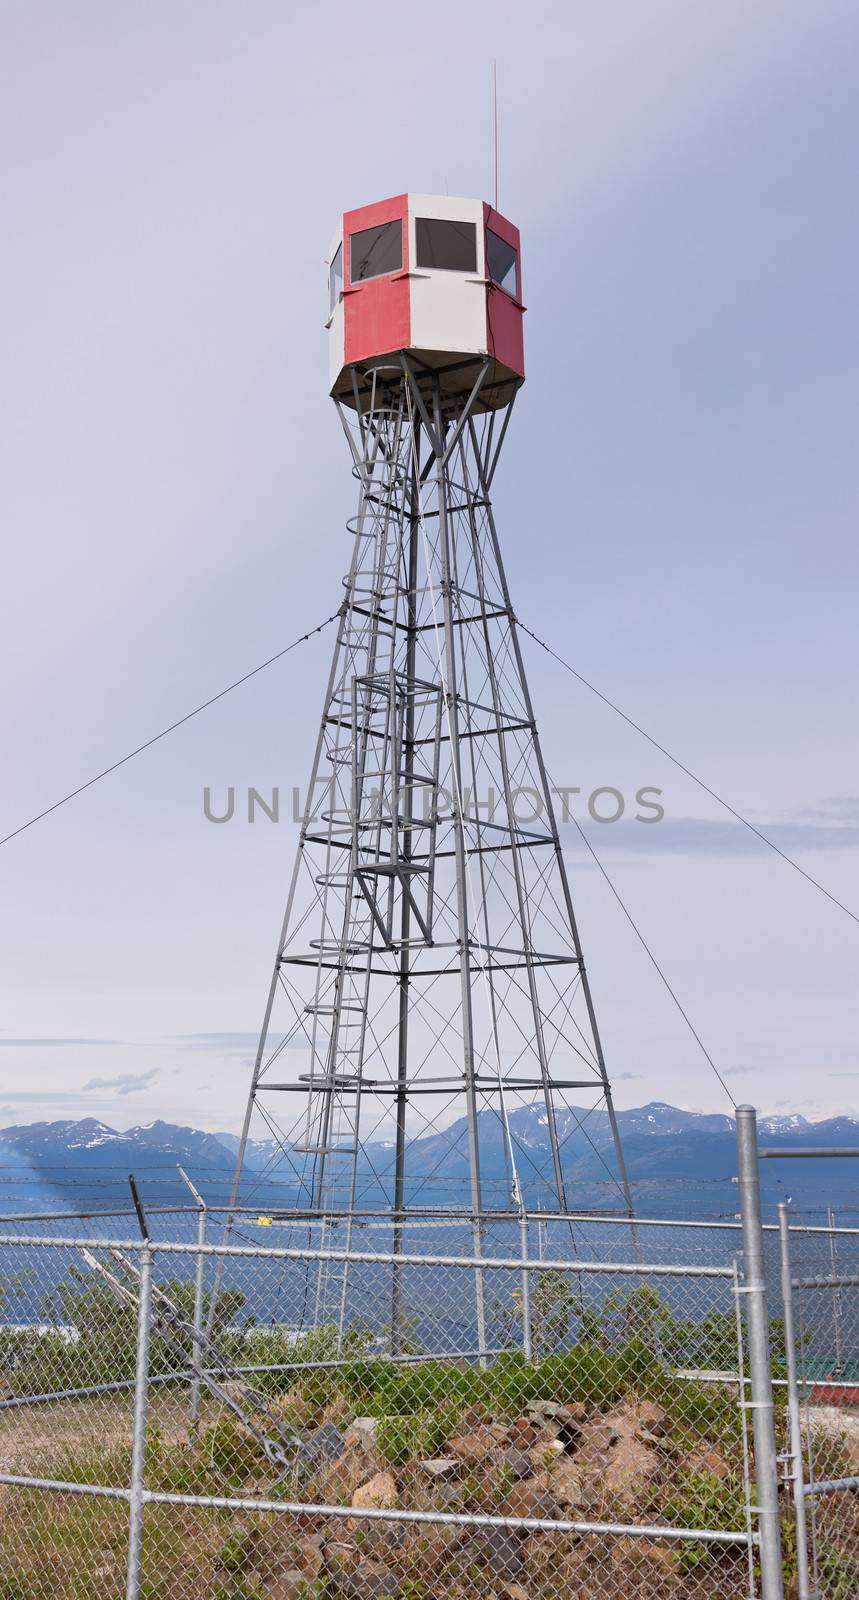 Forest fire watch tower tall architectural steel lookout structure overlooking mountain area of Tagish Yukon Territory Canada